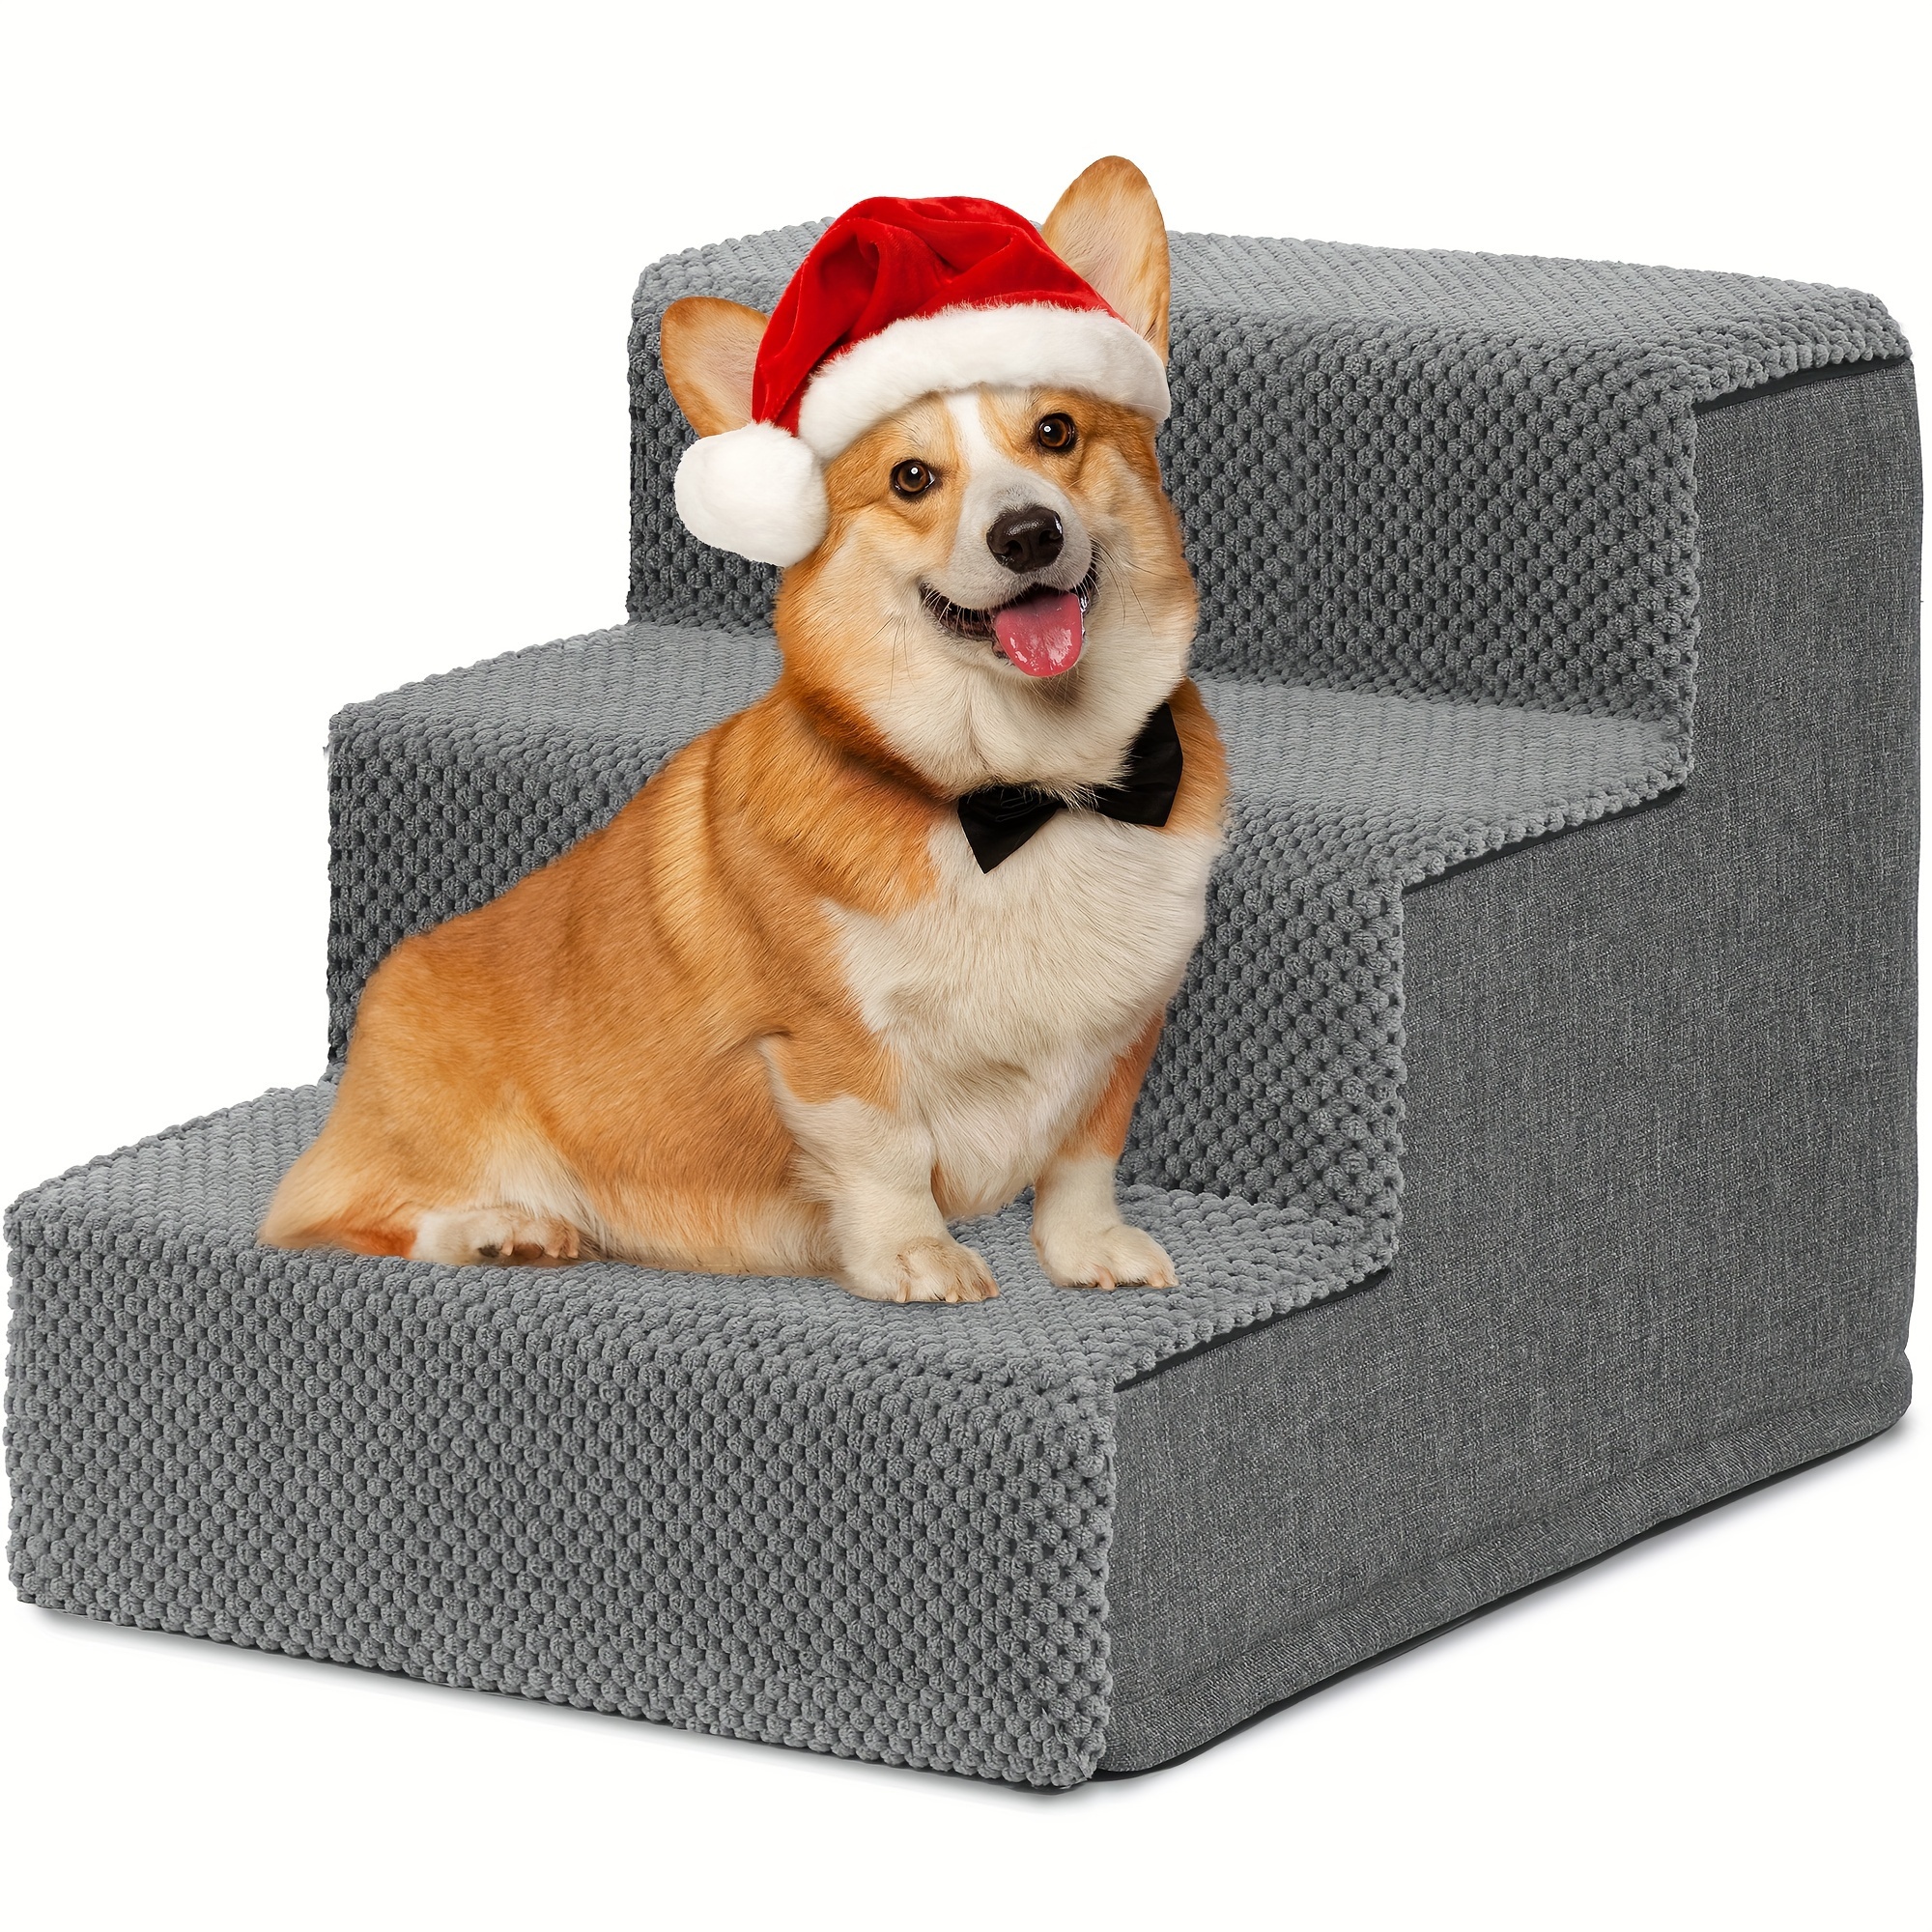 

Dwvo 3 Tiers Dog Stairs For High Bed And Couch, Premium Foam Dog Steps For Small Dogs, Older Pets, Non-slip Pet Stairs With High-strength Boards, Removable Washable Cover